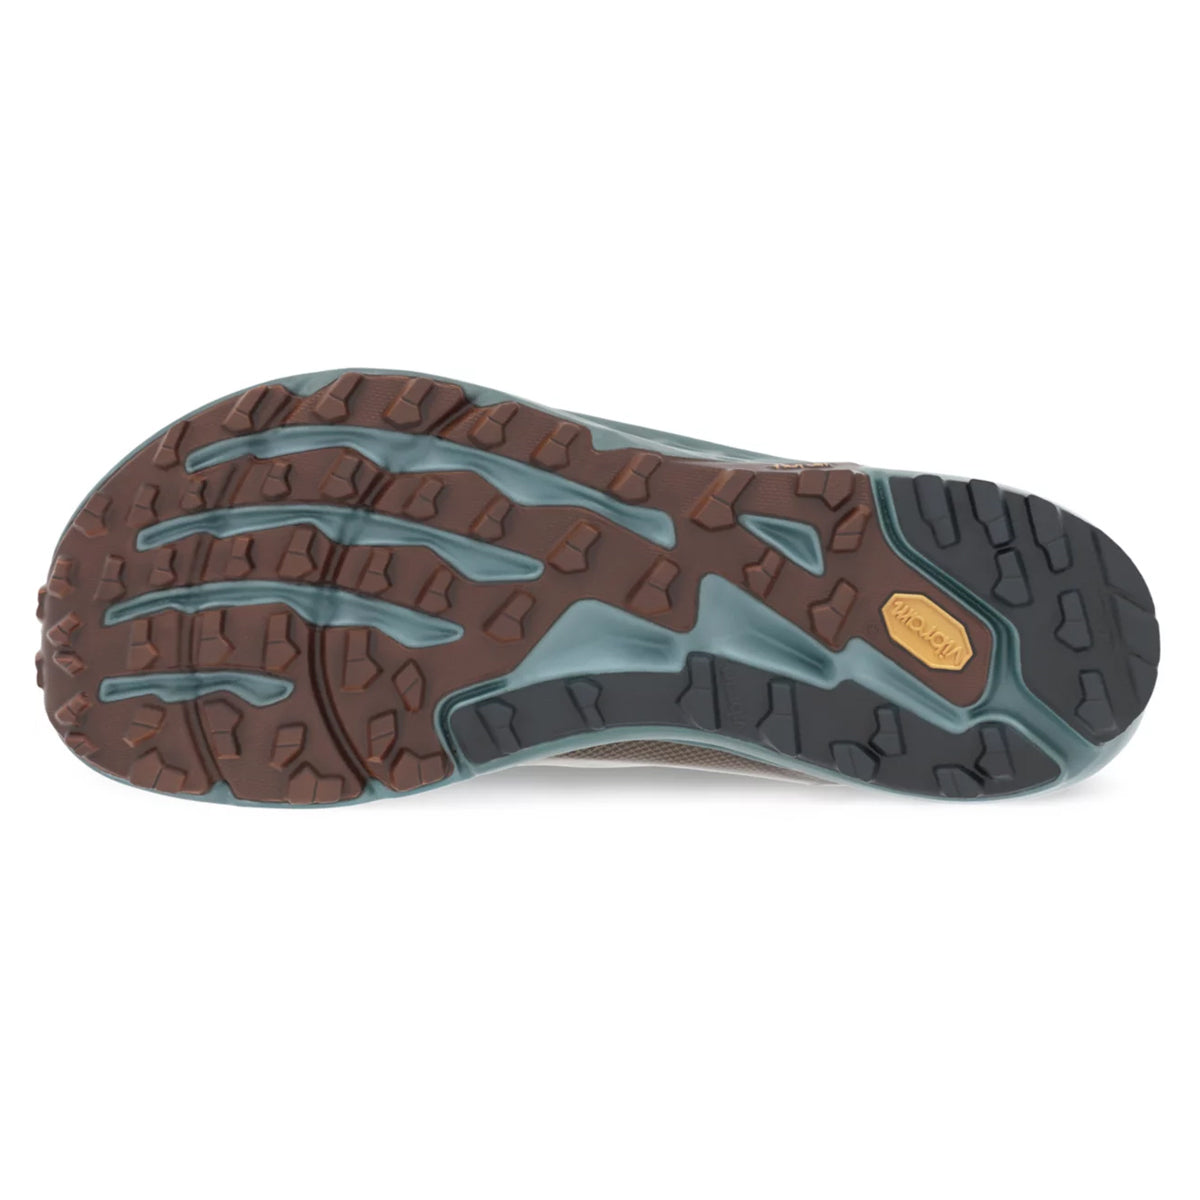 Altra Timp 5 in Brown & Tan by GOHUNT | Altra - GOHUNT Shop